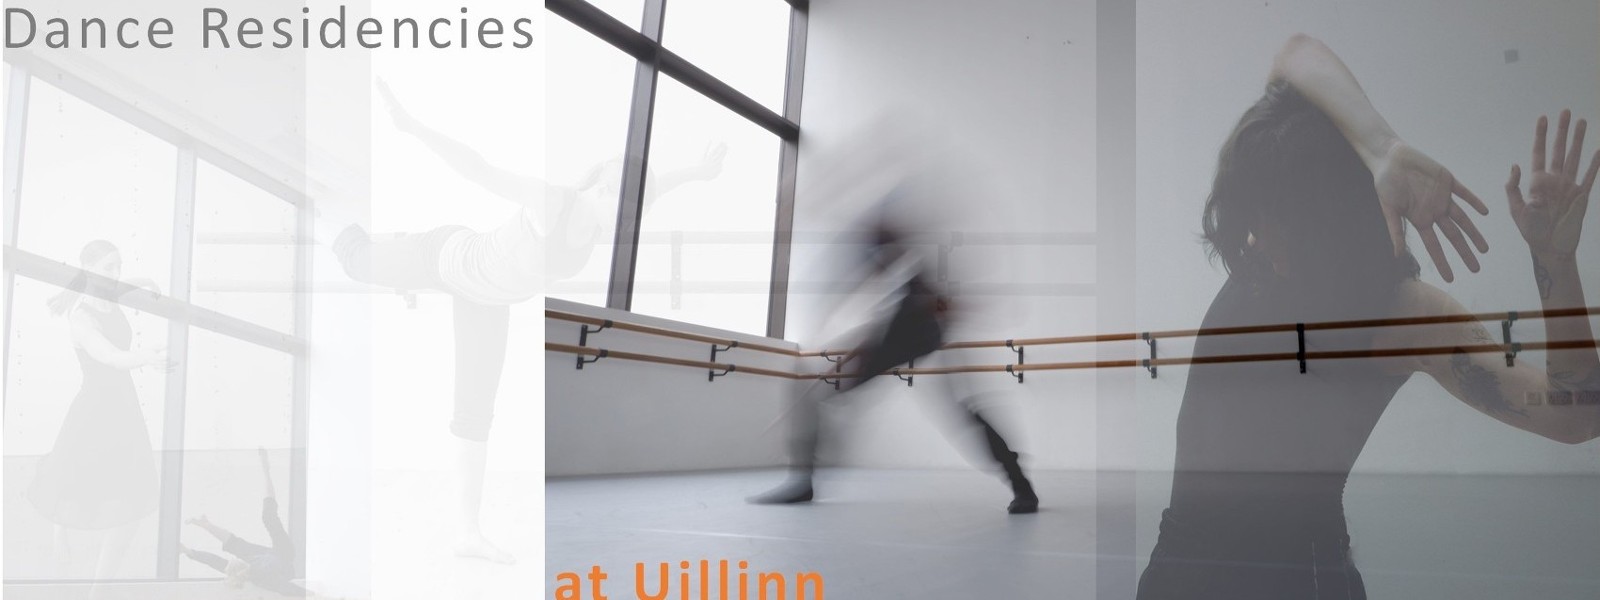 View our current residencies in the dance studio here